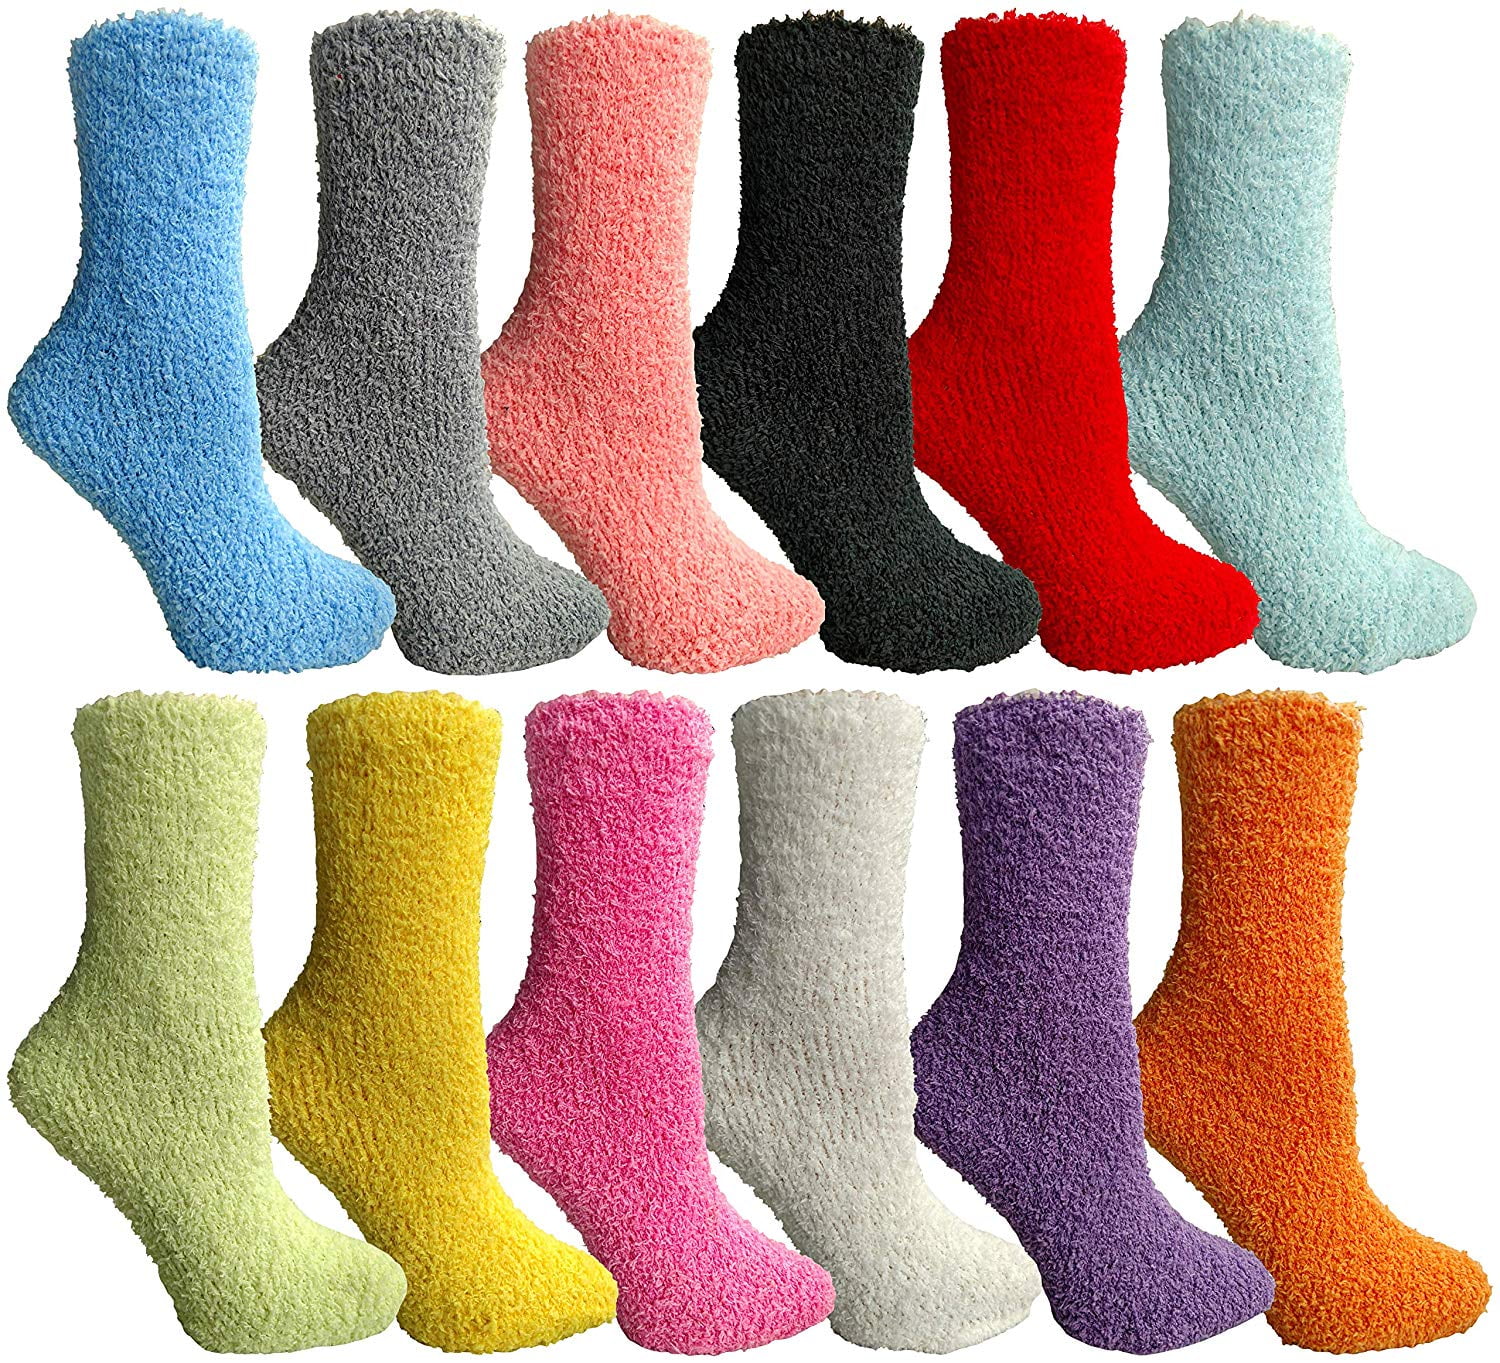 Women's Assorted Plush Socks Lot of 24 Pairs One Size Fits Most 